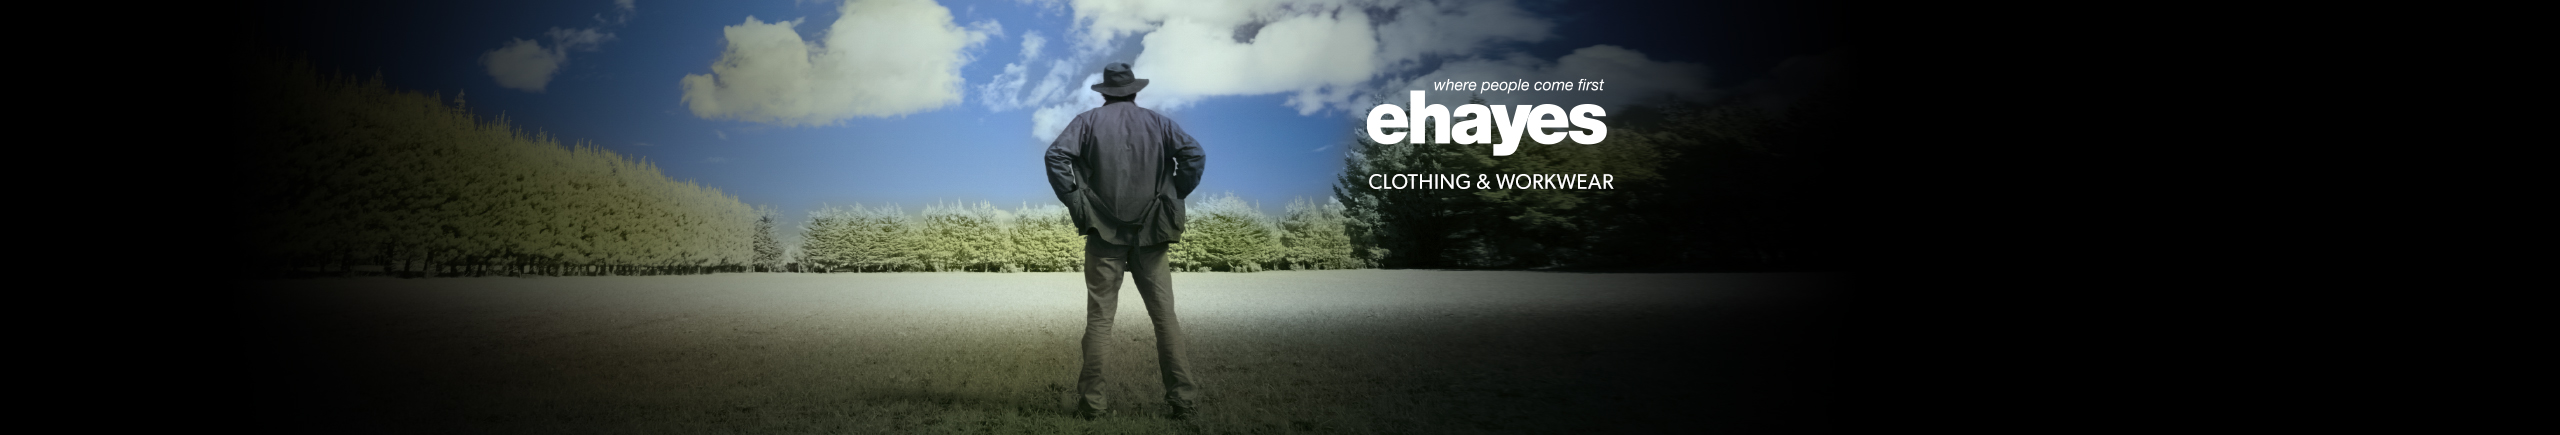 E Hayes for hard working clothing and footwear